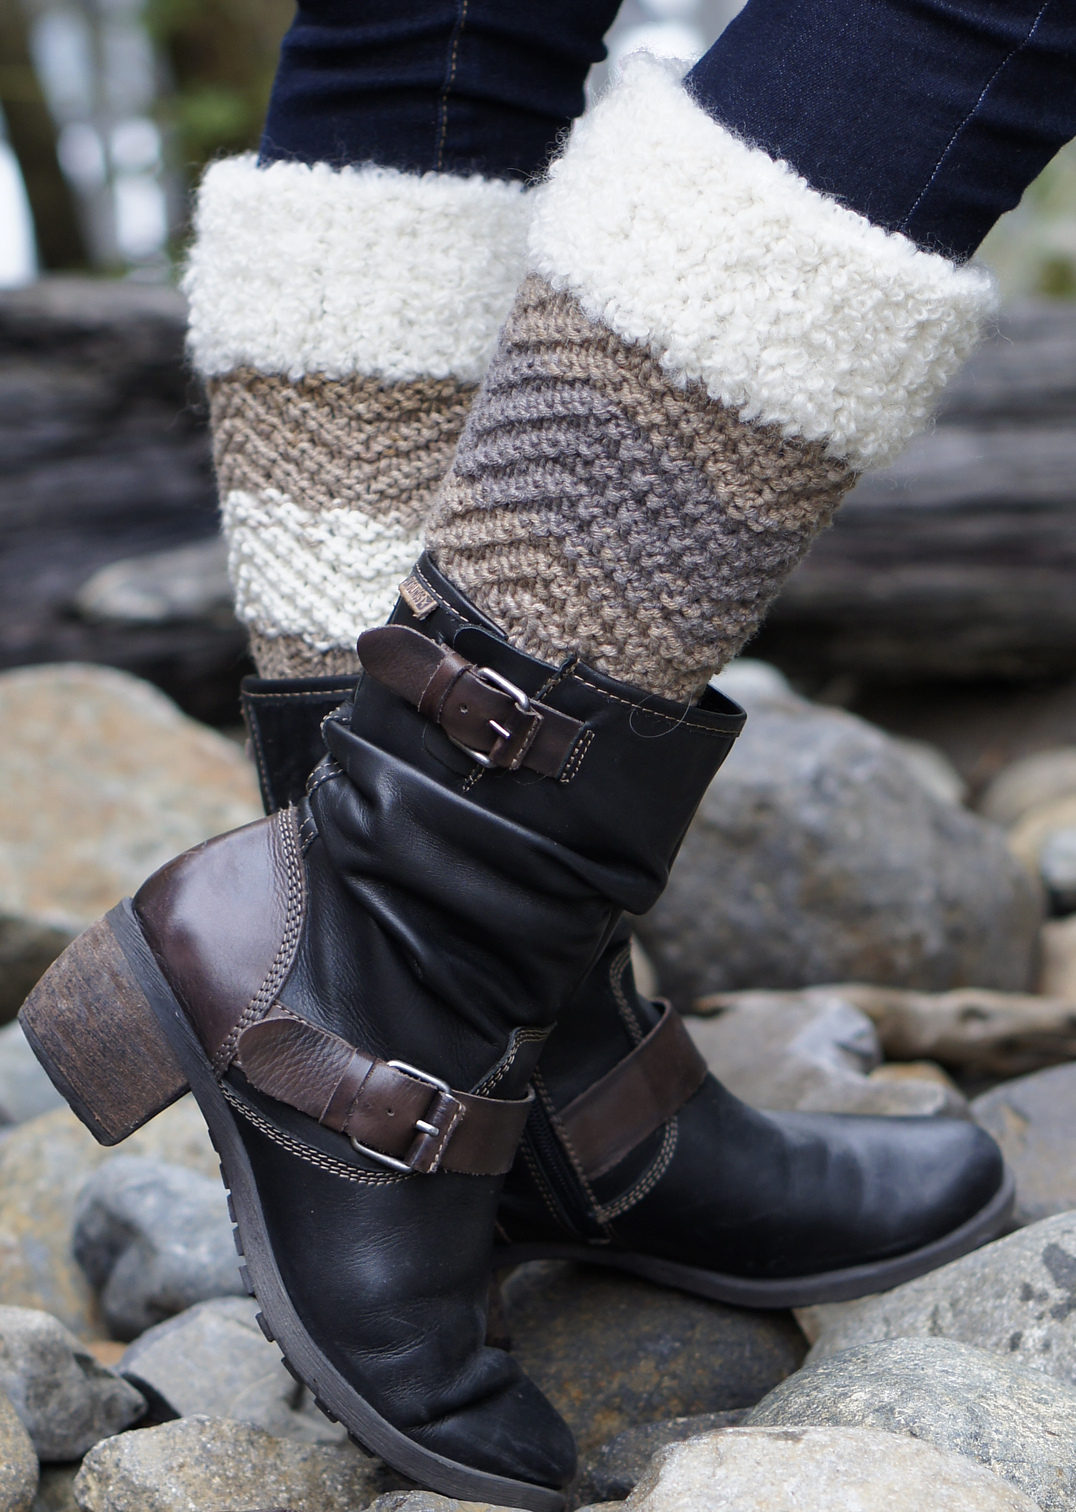 27 Free Patterns for Knit Boot Cuffs | Guide Patterns